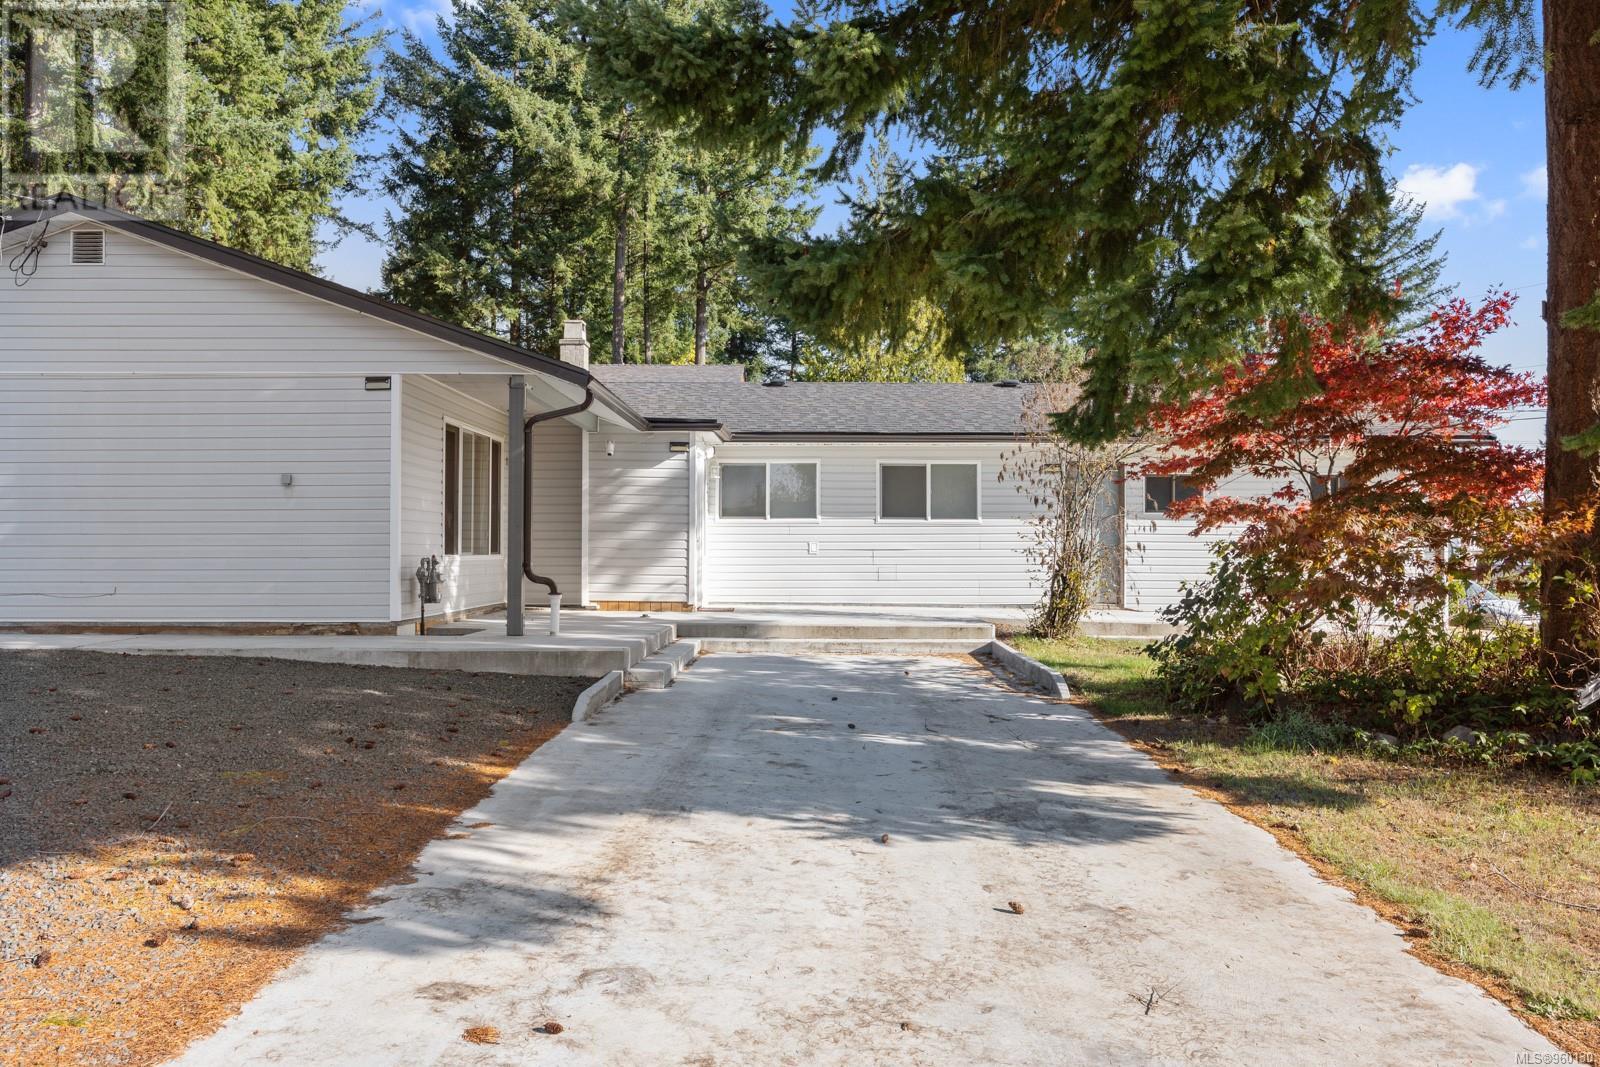 755 Lorne Cres, Campbell River